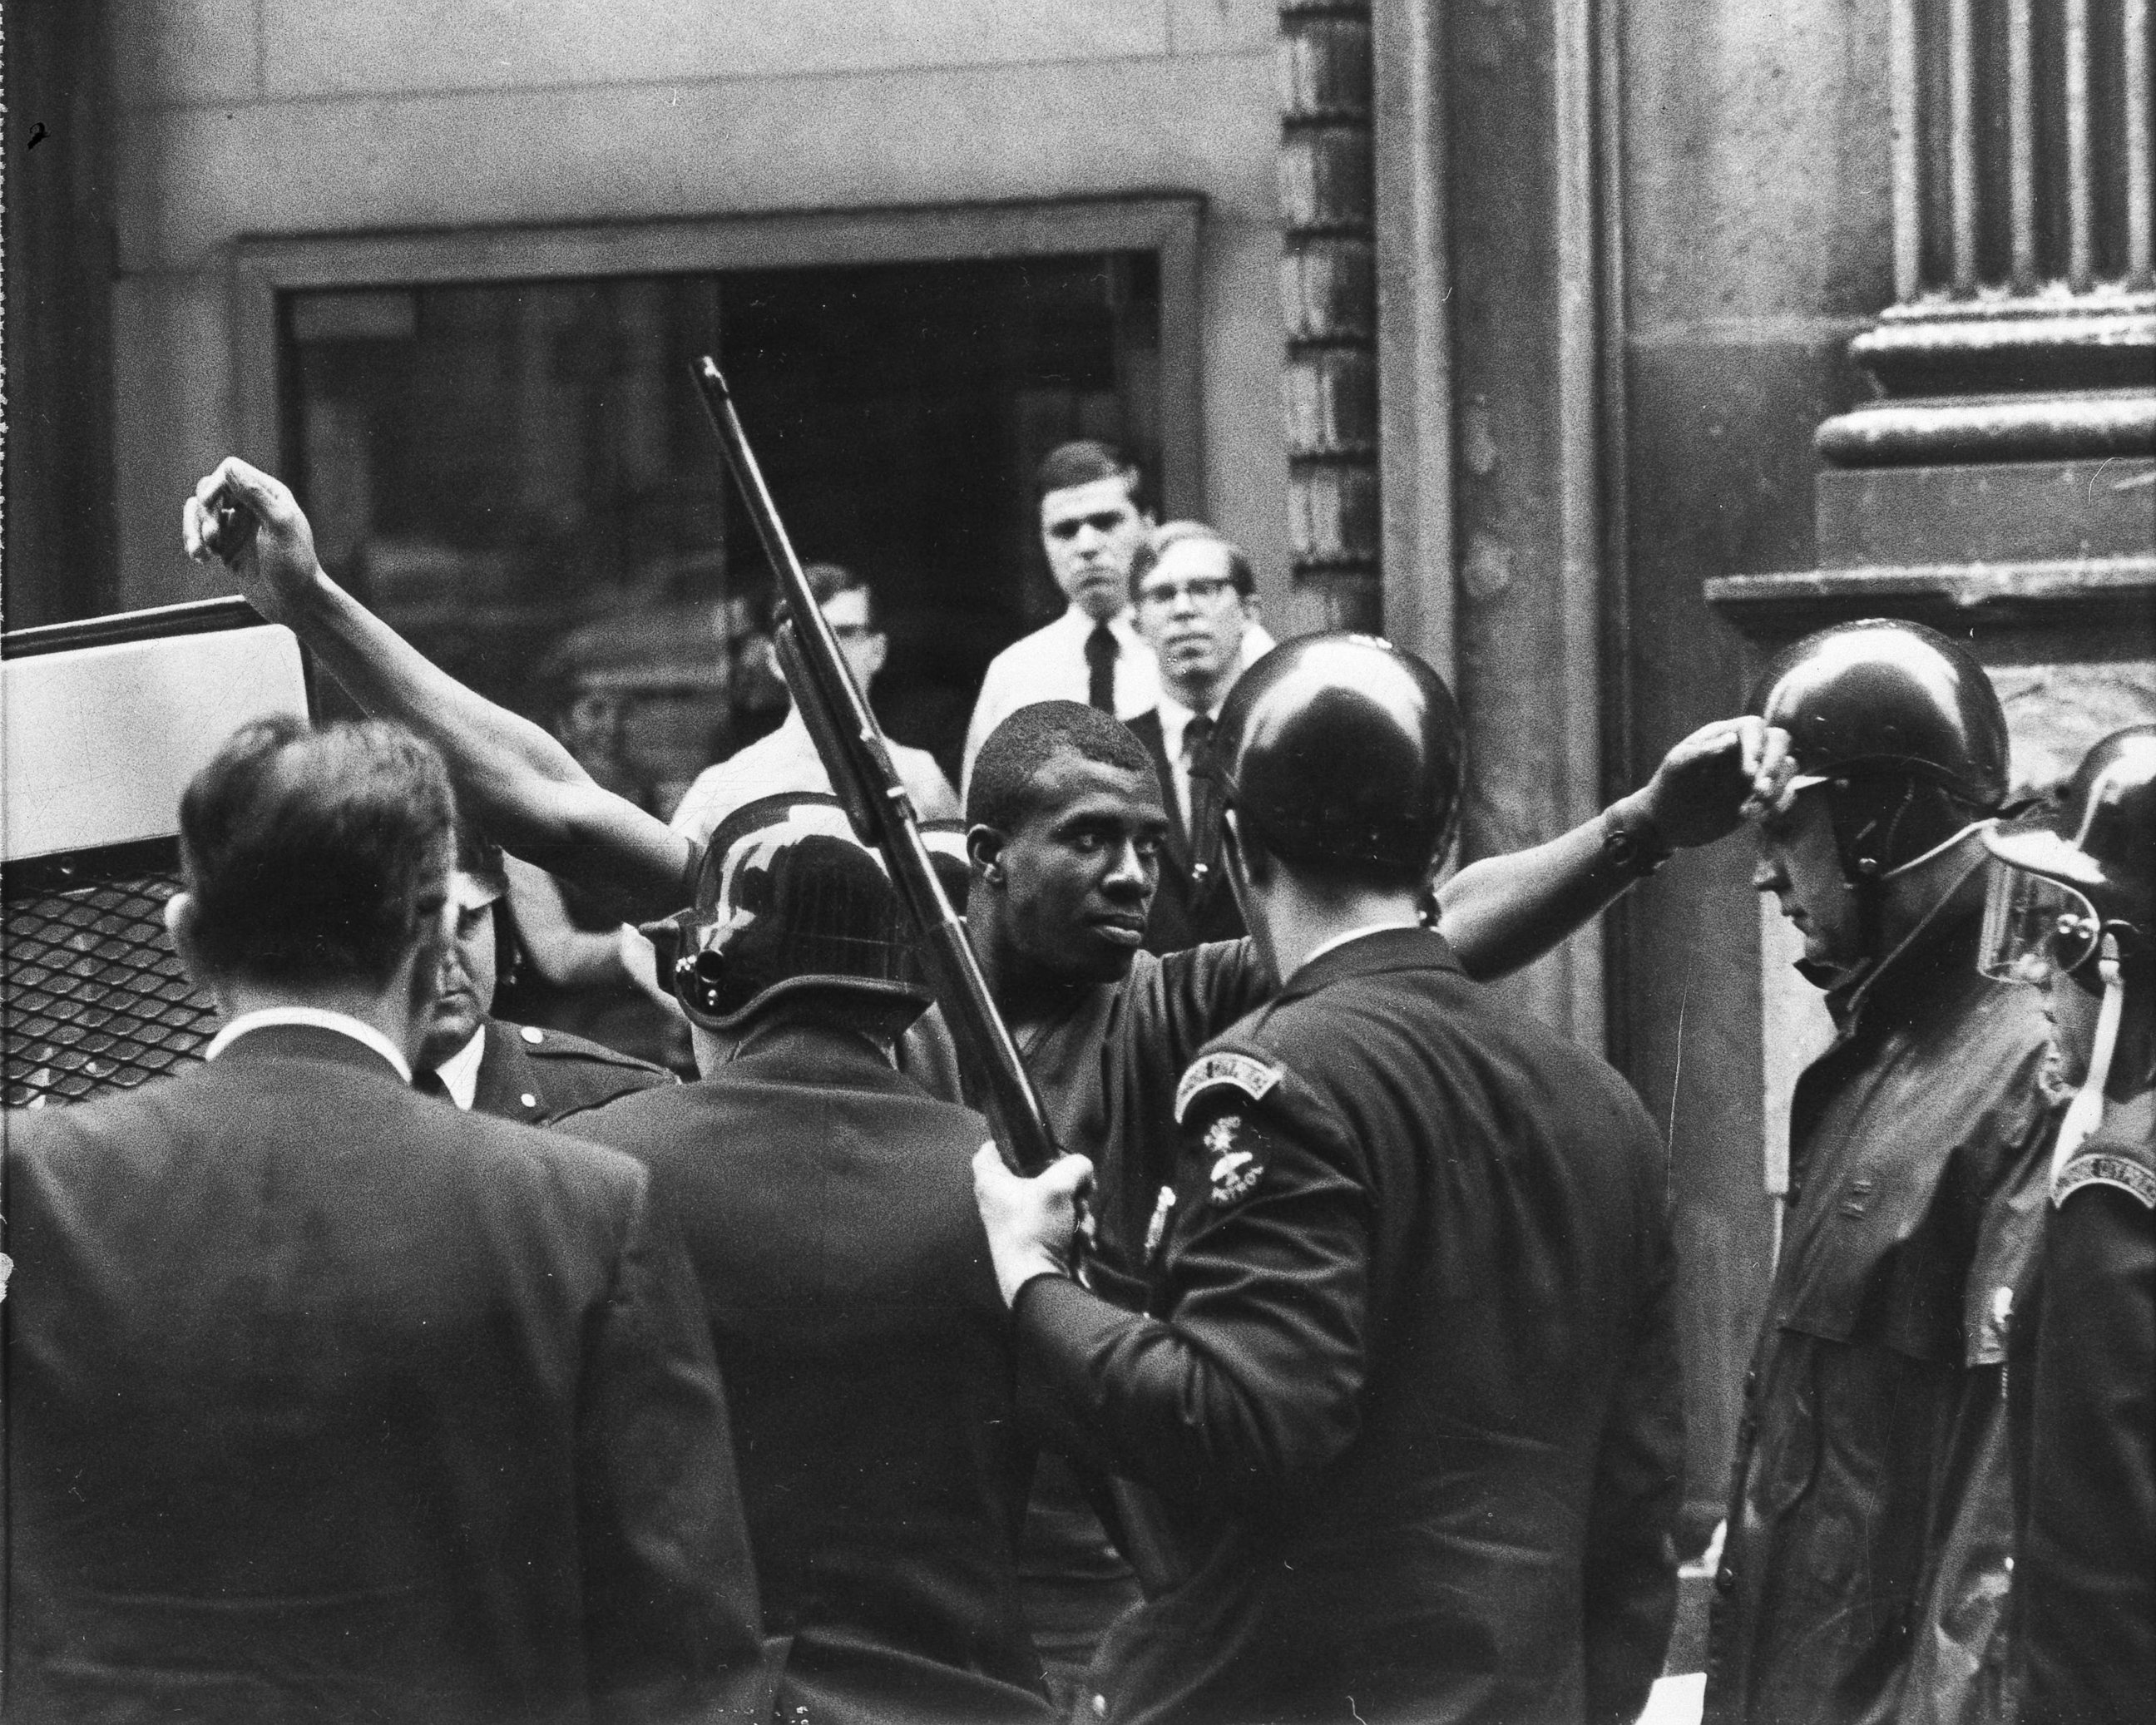 PHOTO: Pictured is one of four men arrested by police in downtown Baltimore on April 8, 1968. William A. Smith, an Associated Press photographer, said he saw police confiscate whiskey bottles filled with gasoline. 